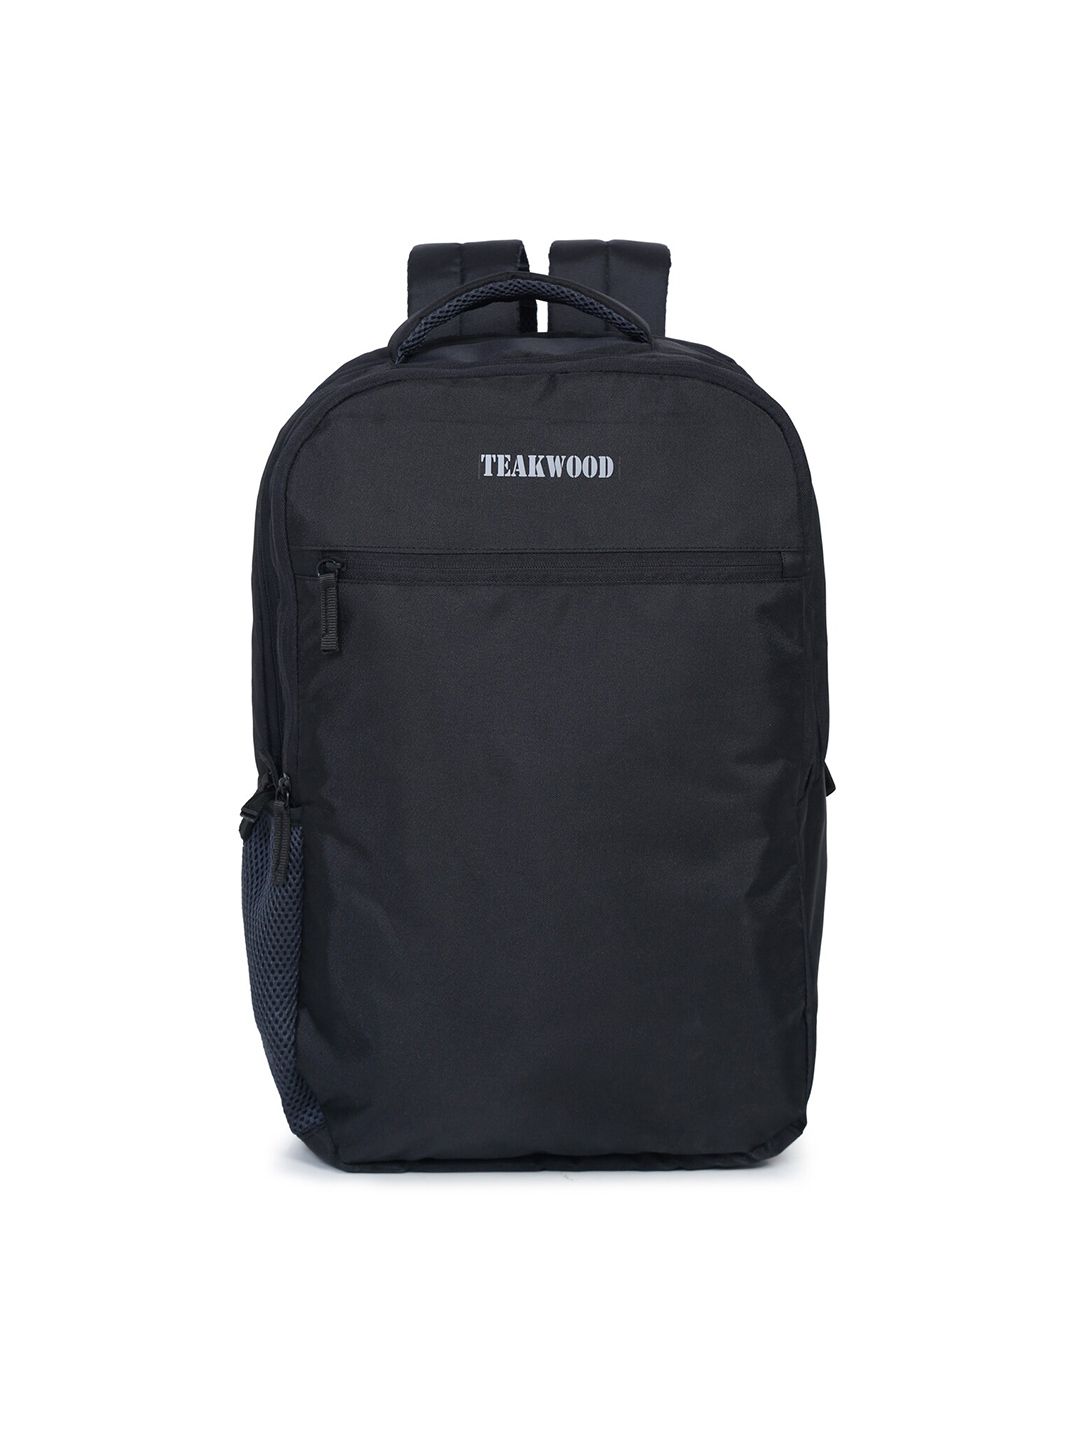 Teakwood Leathers Black & Grey 15 Inch Solid Laptop Backpack Price in India